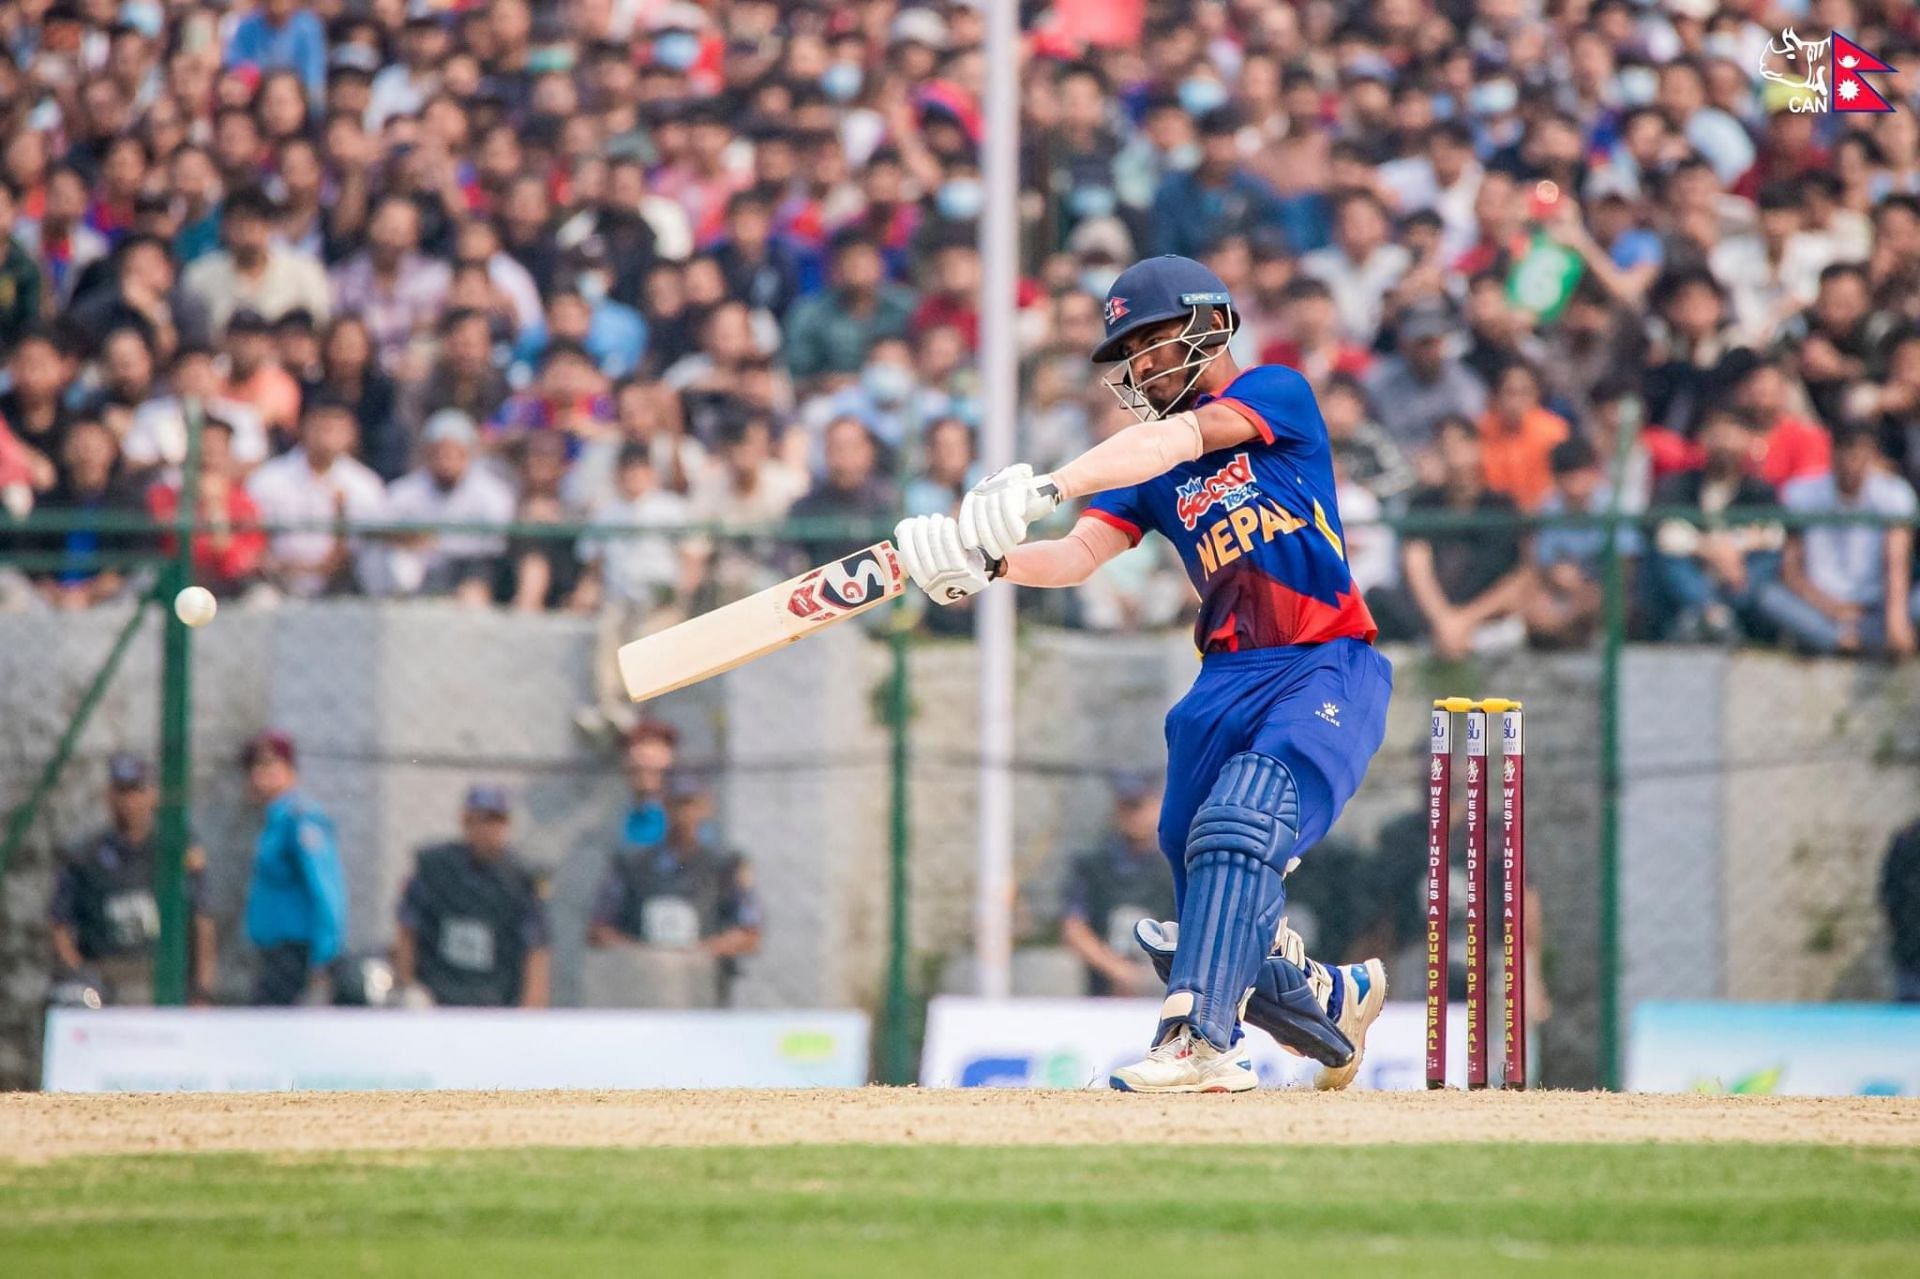 Rohit Paudel starred with 112. (Image Credits: Twitter)